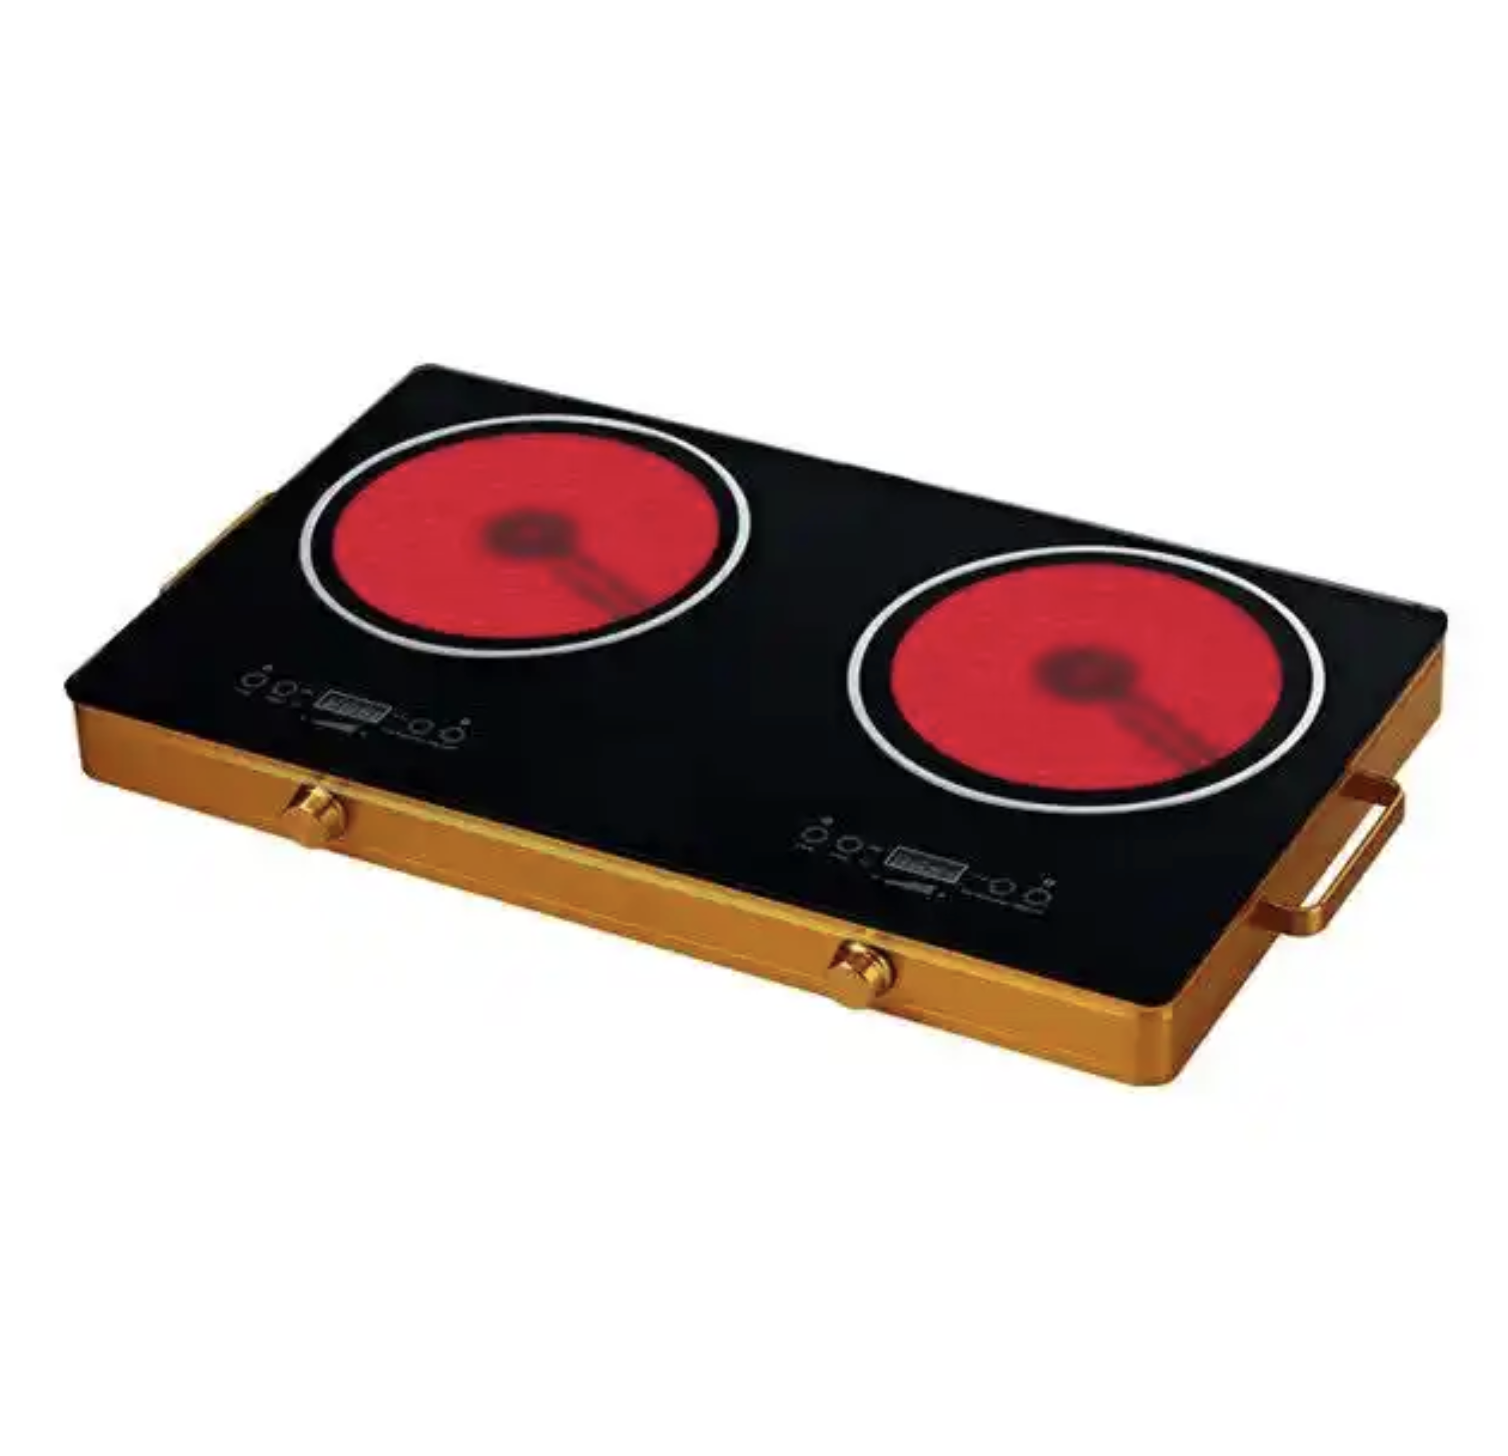 Hot Plate Double Burner Cooker Stove Countertop Stainless Steel Body Ceramic Glass Infrared 2 Burners Cooker 